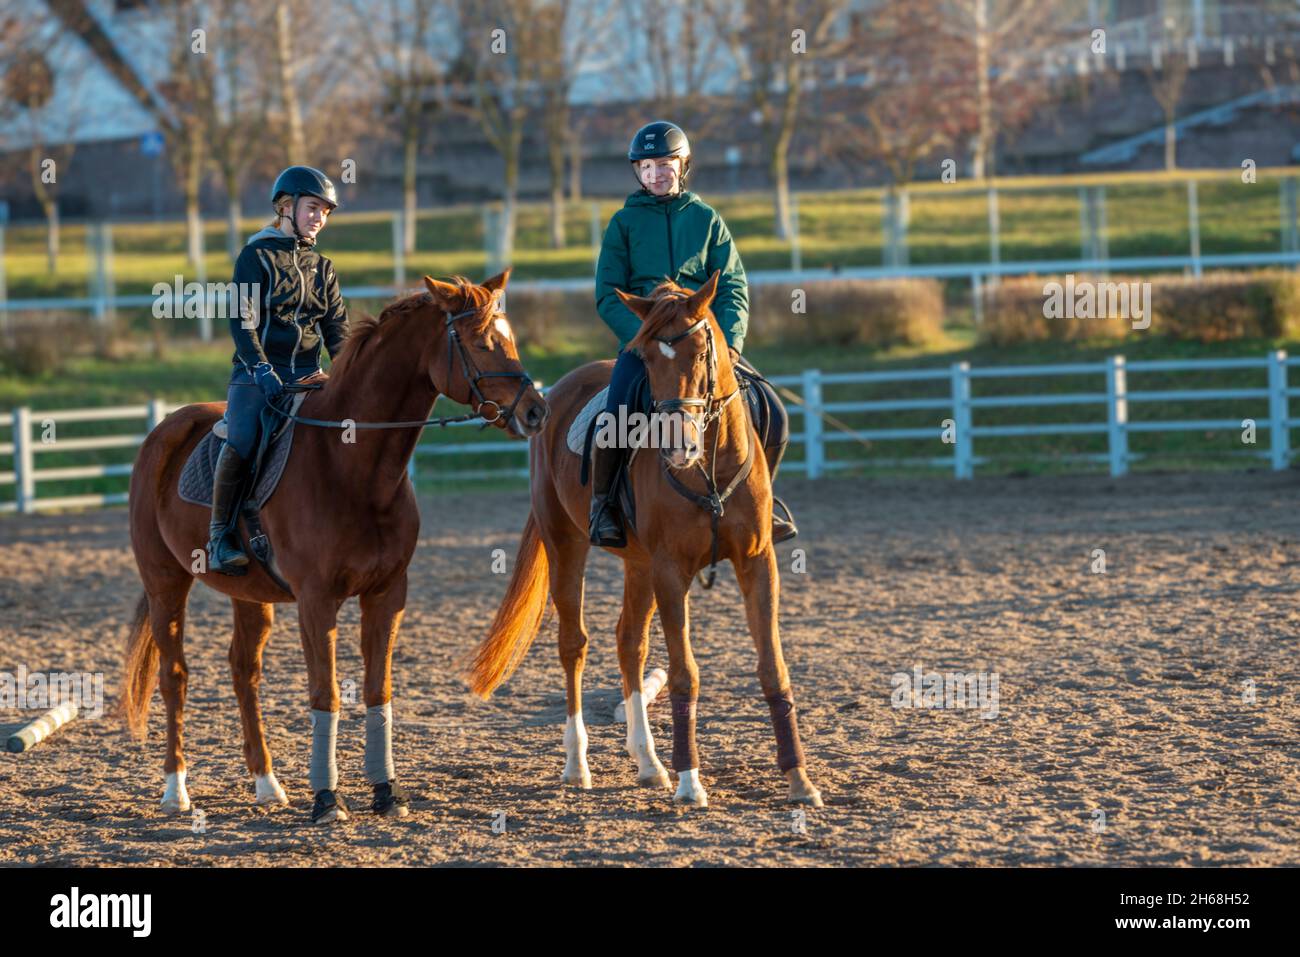 riding lessons, useful skill, horse therapy Stock Photo